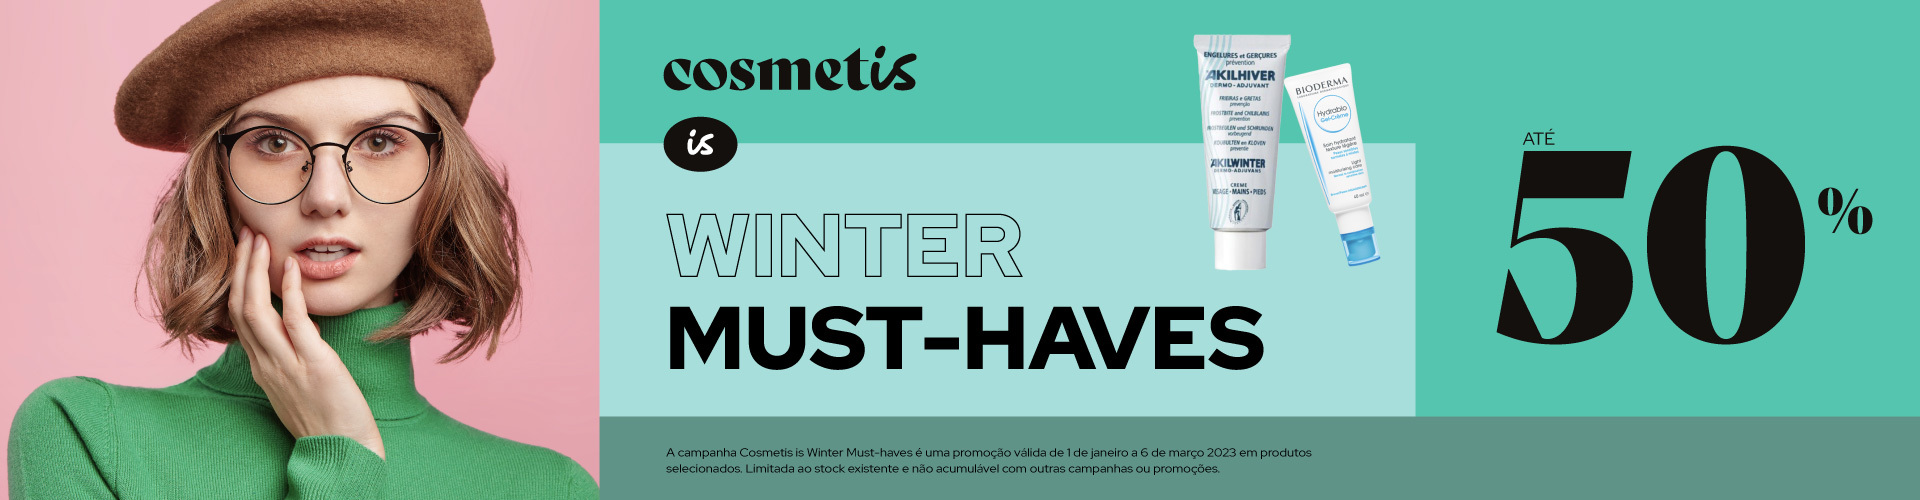 Cosmetis is Winter Must-haves